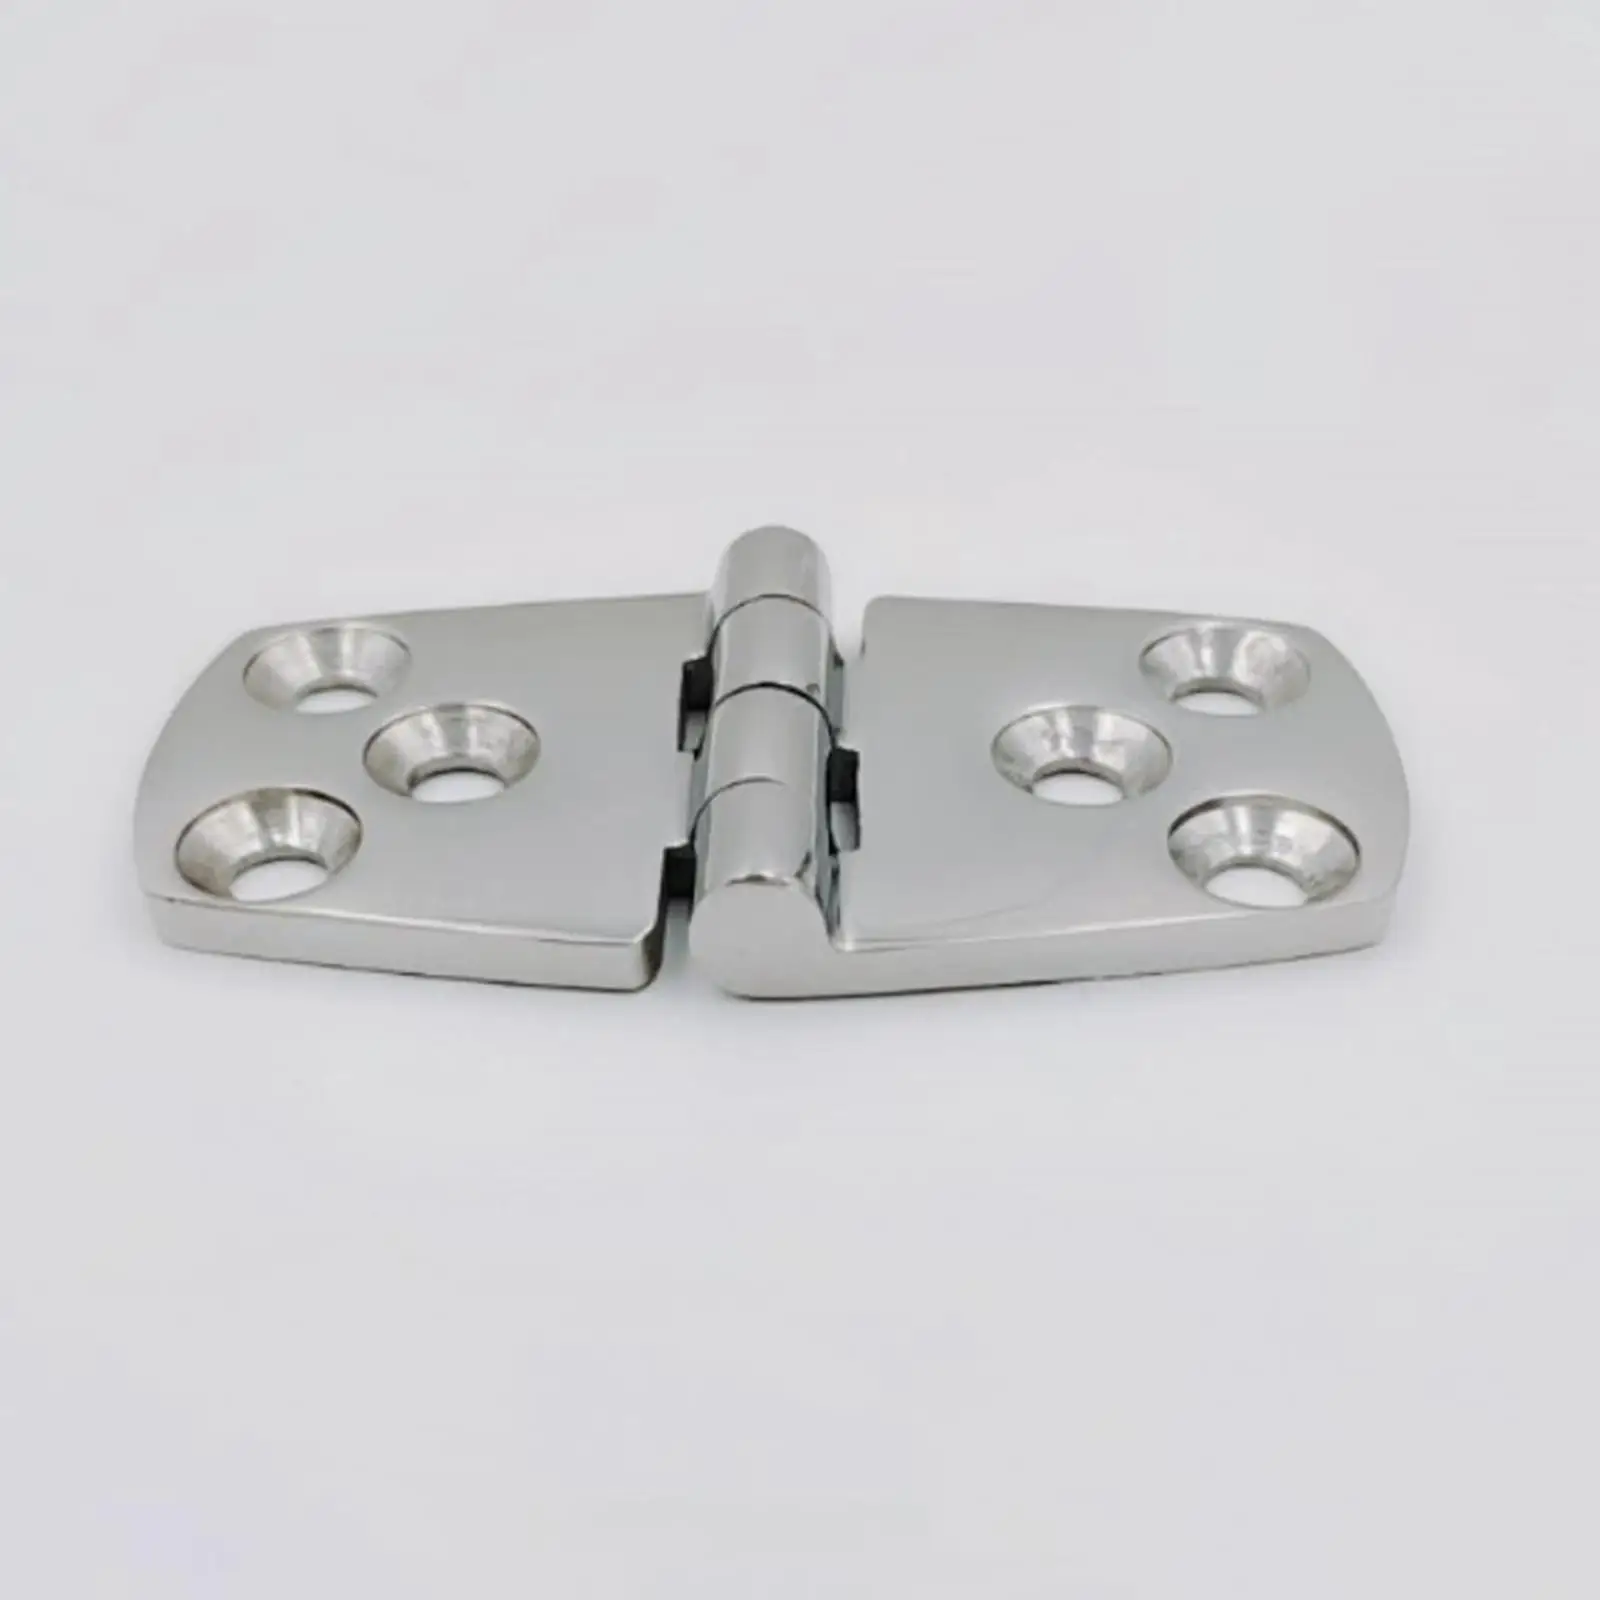 Boat Hinge Cast Solid Accessory 6 Holes Mirror Polished Stainless Steel Hatch Hinge for Cabinet Folding Door Boat Window RV